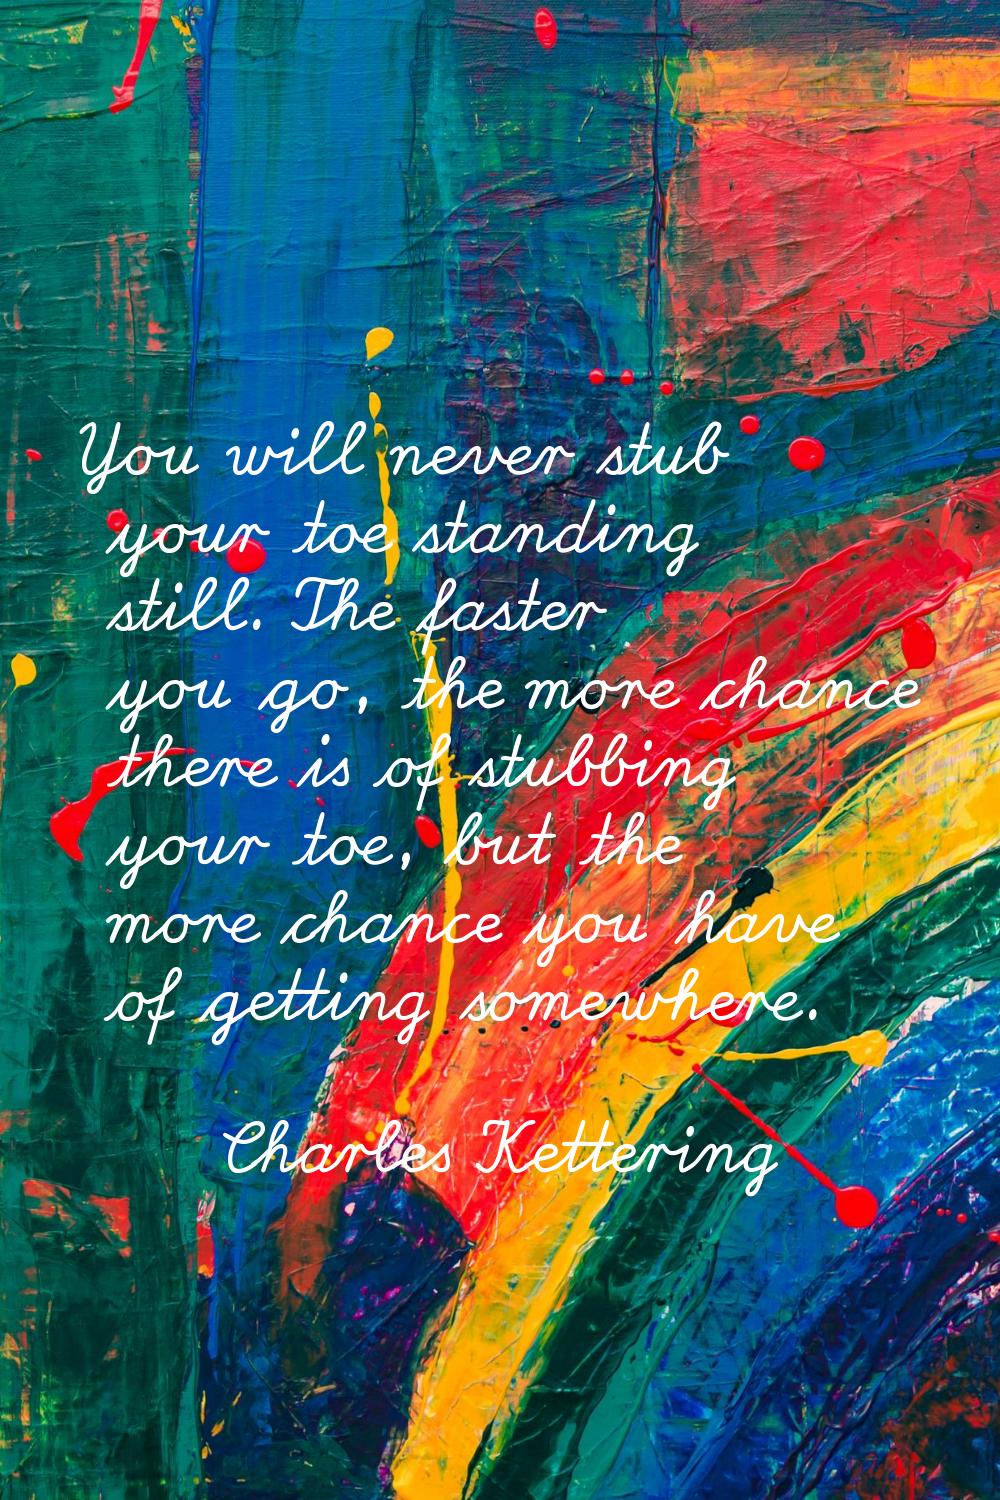 You will never stub your toe standing still. The faster you go, the more chance there is of stubbin